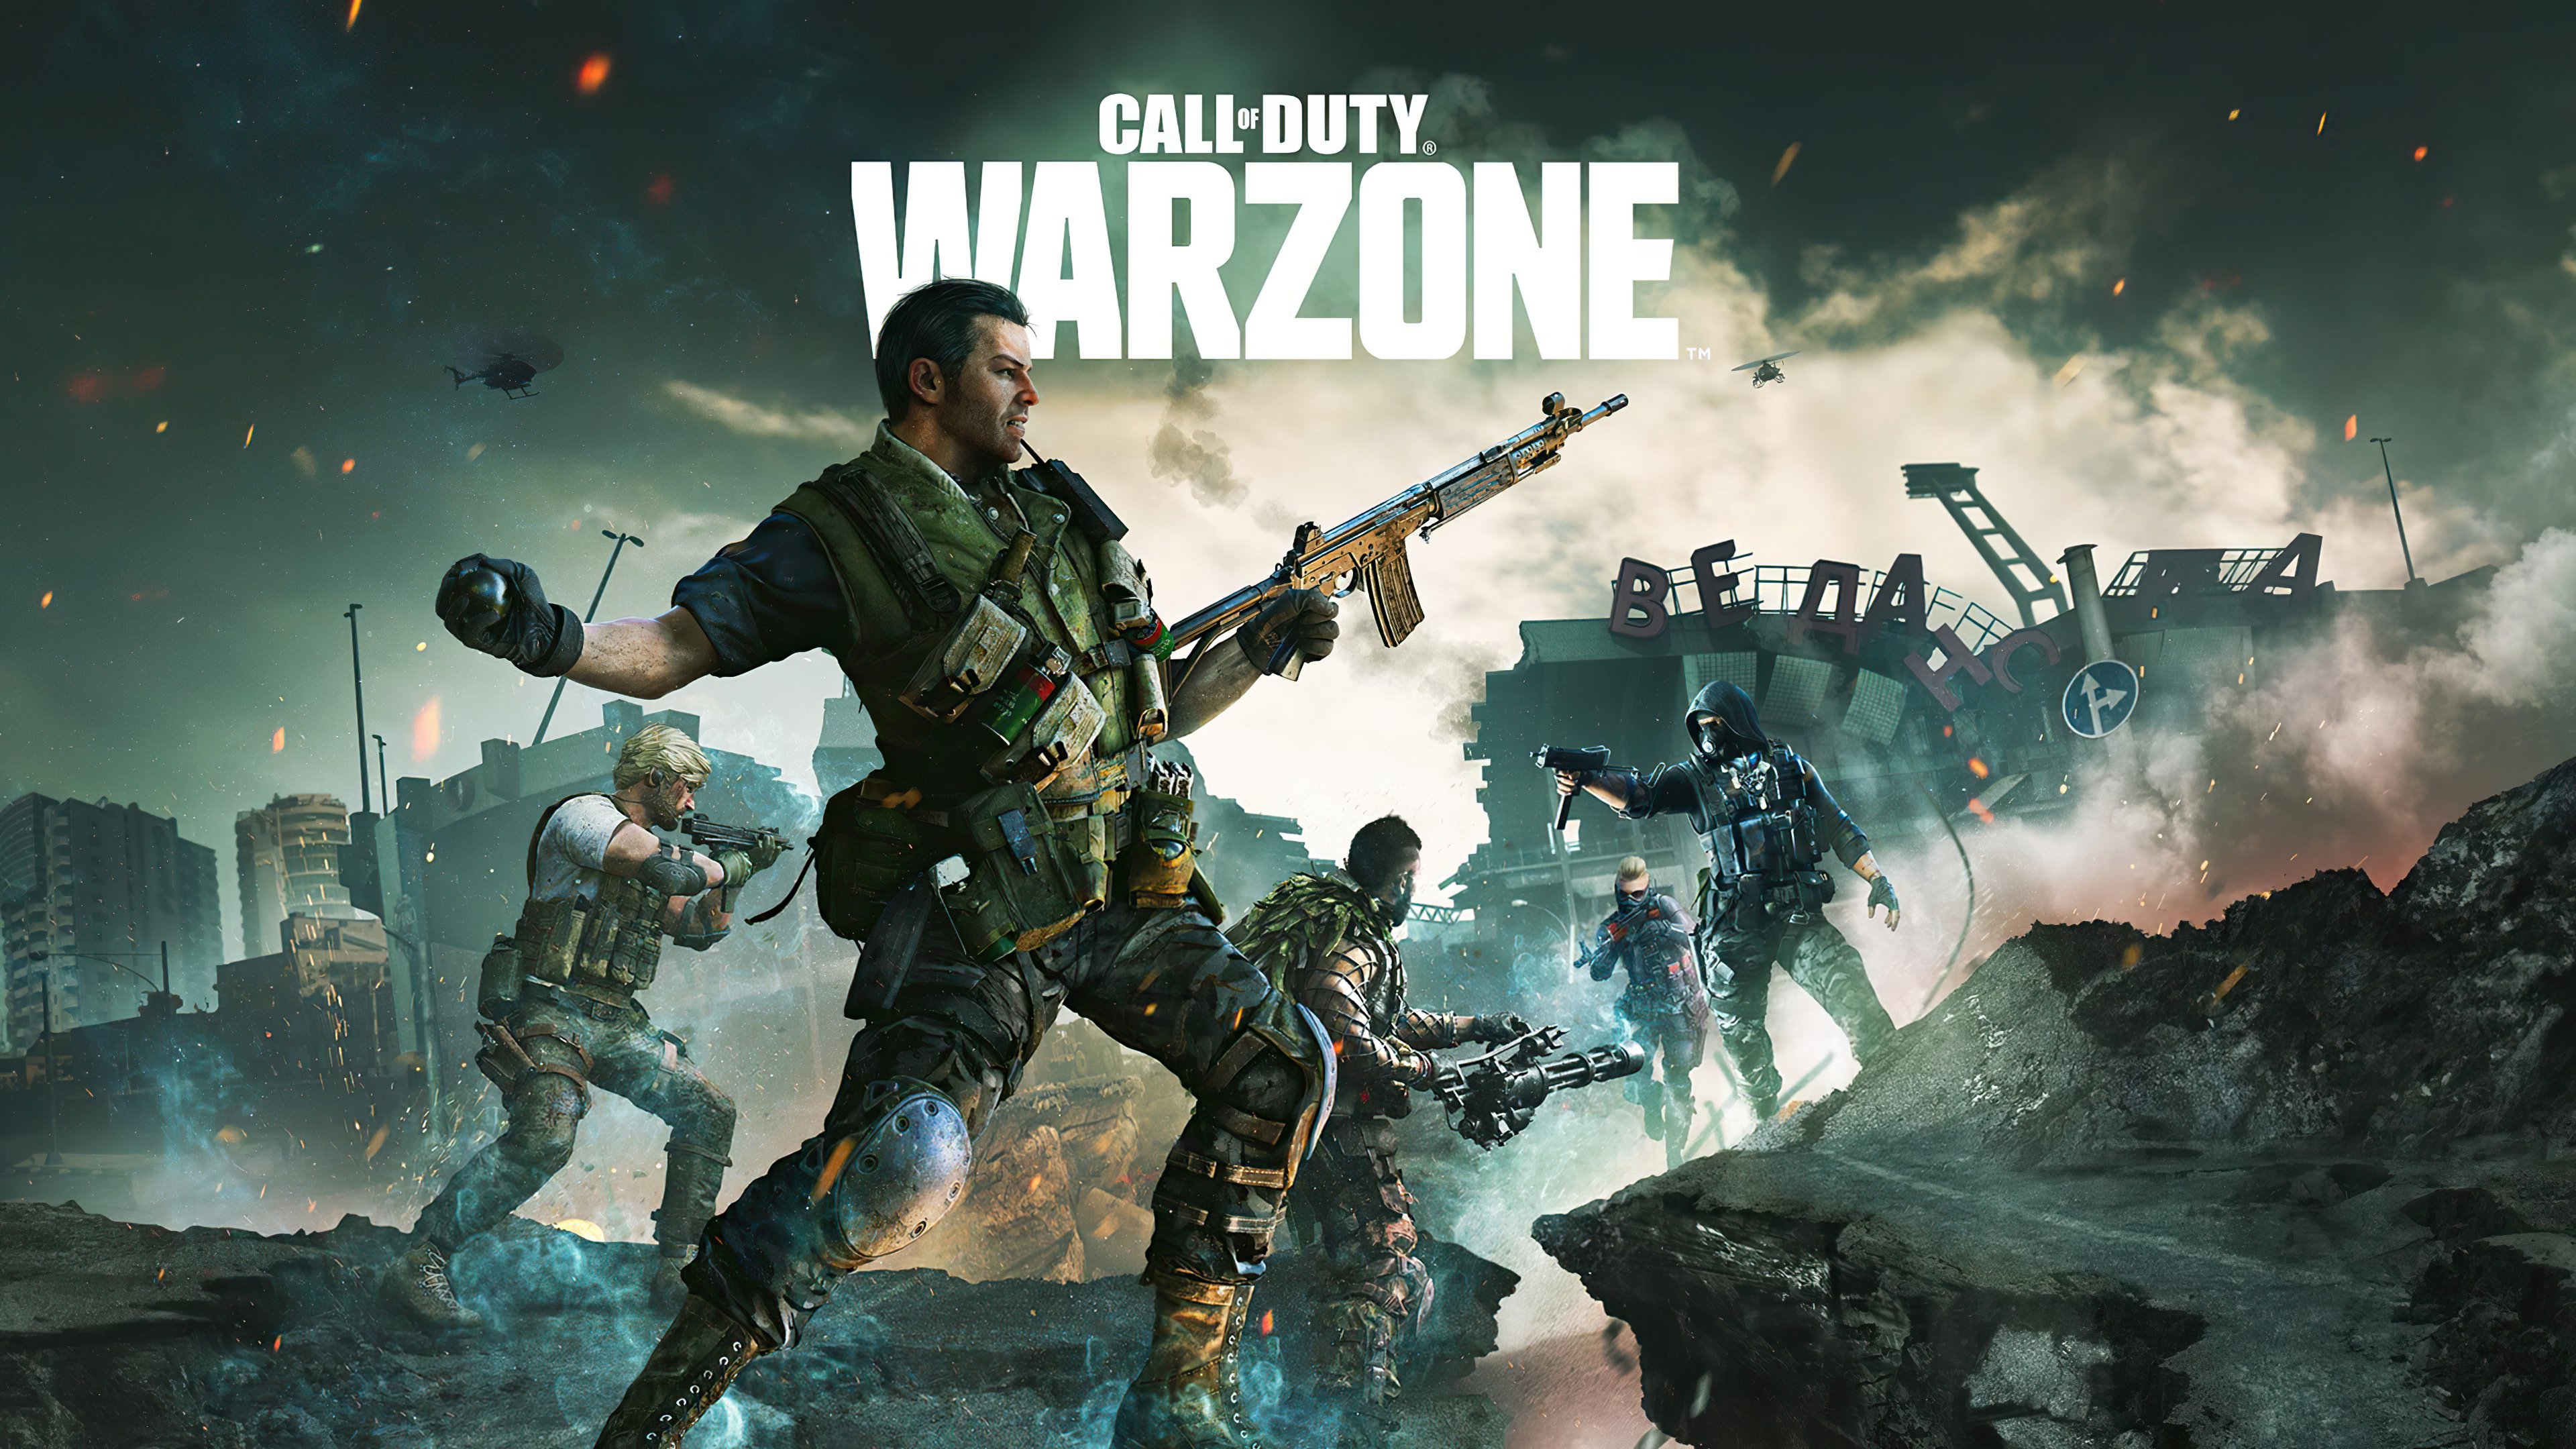 Wallpaper Call of Duty Warzone 2021